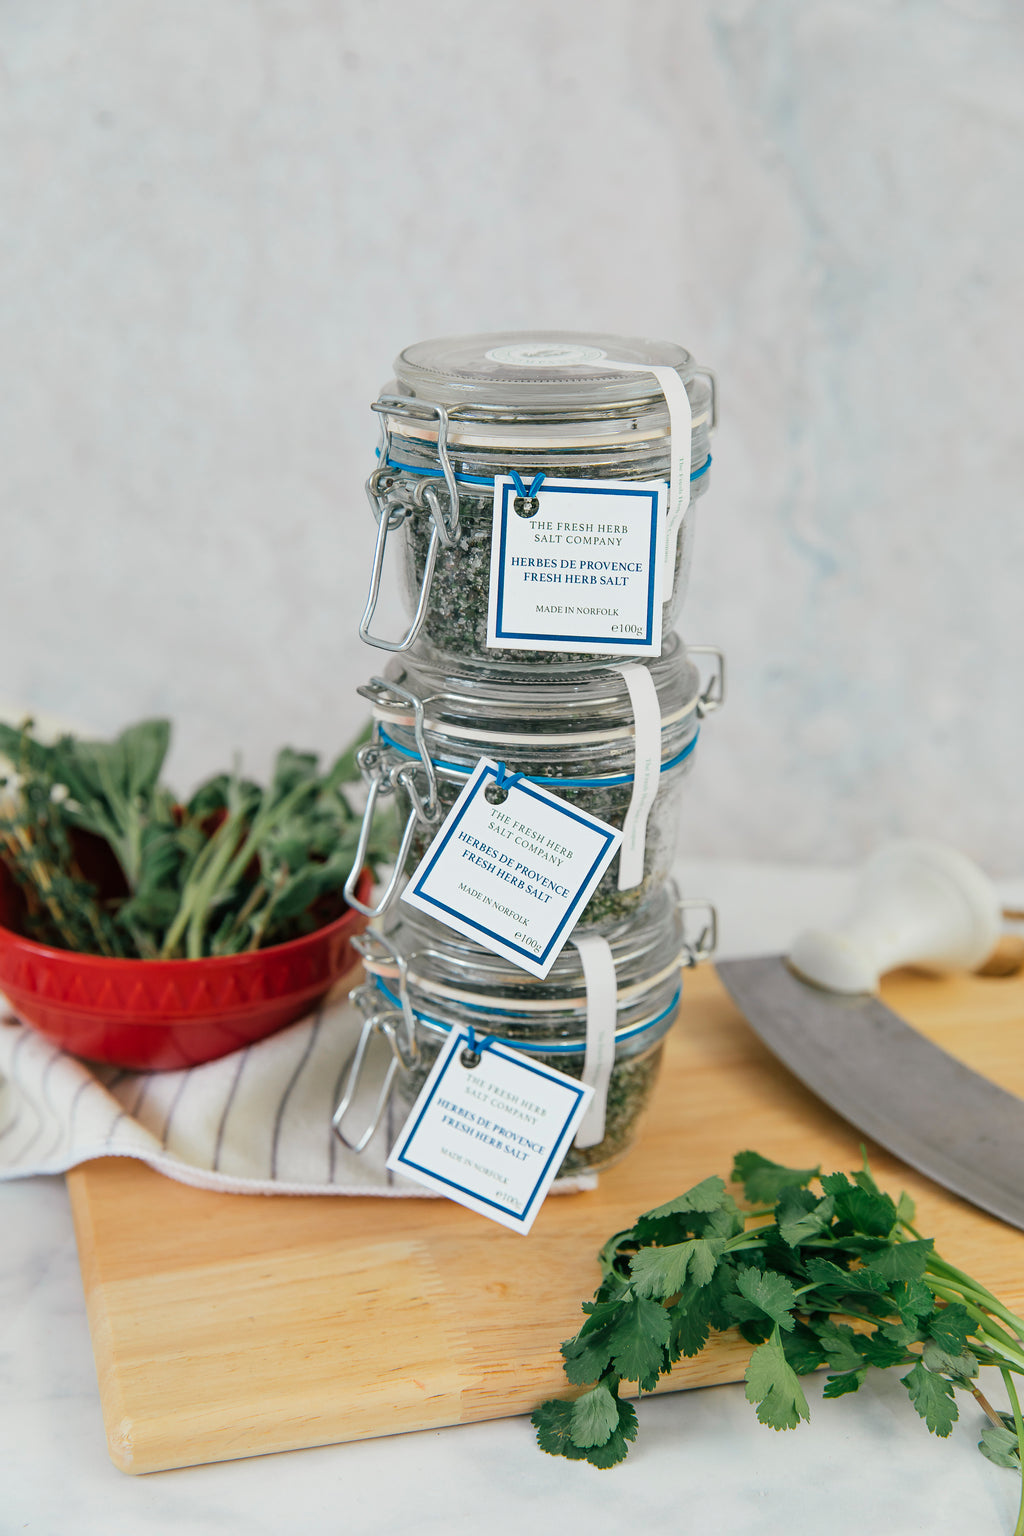 "Capture the essence of an French kitchen with this image showcasing 3 glass Kilner jars as a discounted package, filled with a blend of Herbes de Provence Fresh Herb Sea Salt Seasoning. The aromatic mix of marjoram, sage, parsley, and thyme intertwines with a combination of coarse and fine pure white sea salt for a visually stunning culinary experience.". A convenient way to save money and give a jar to your friends as a gift!"